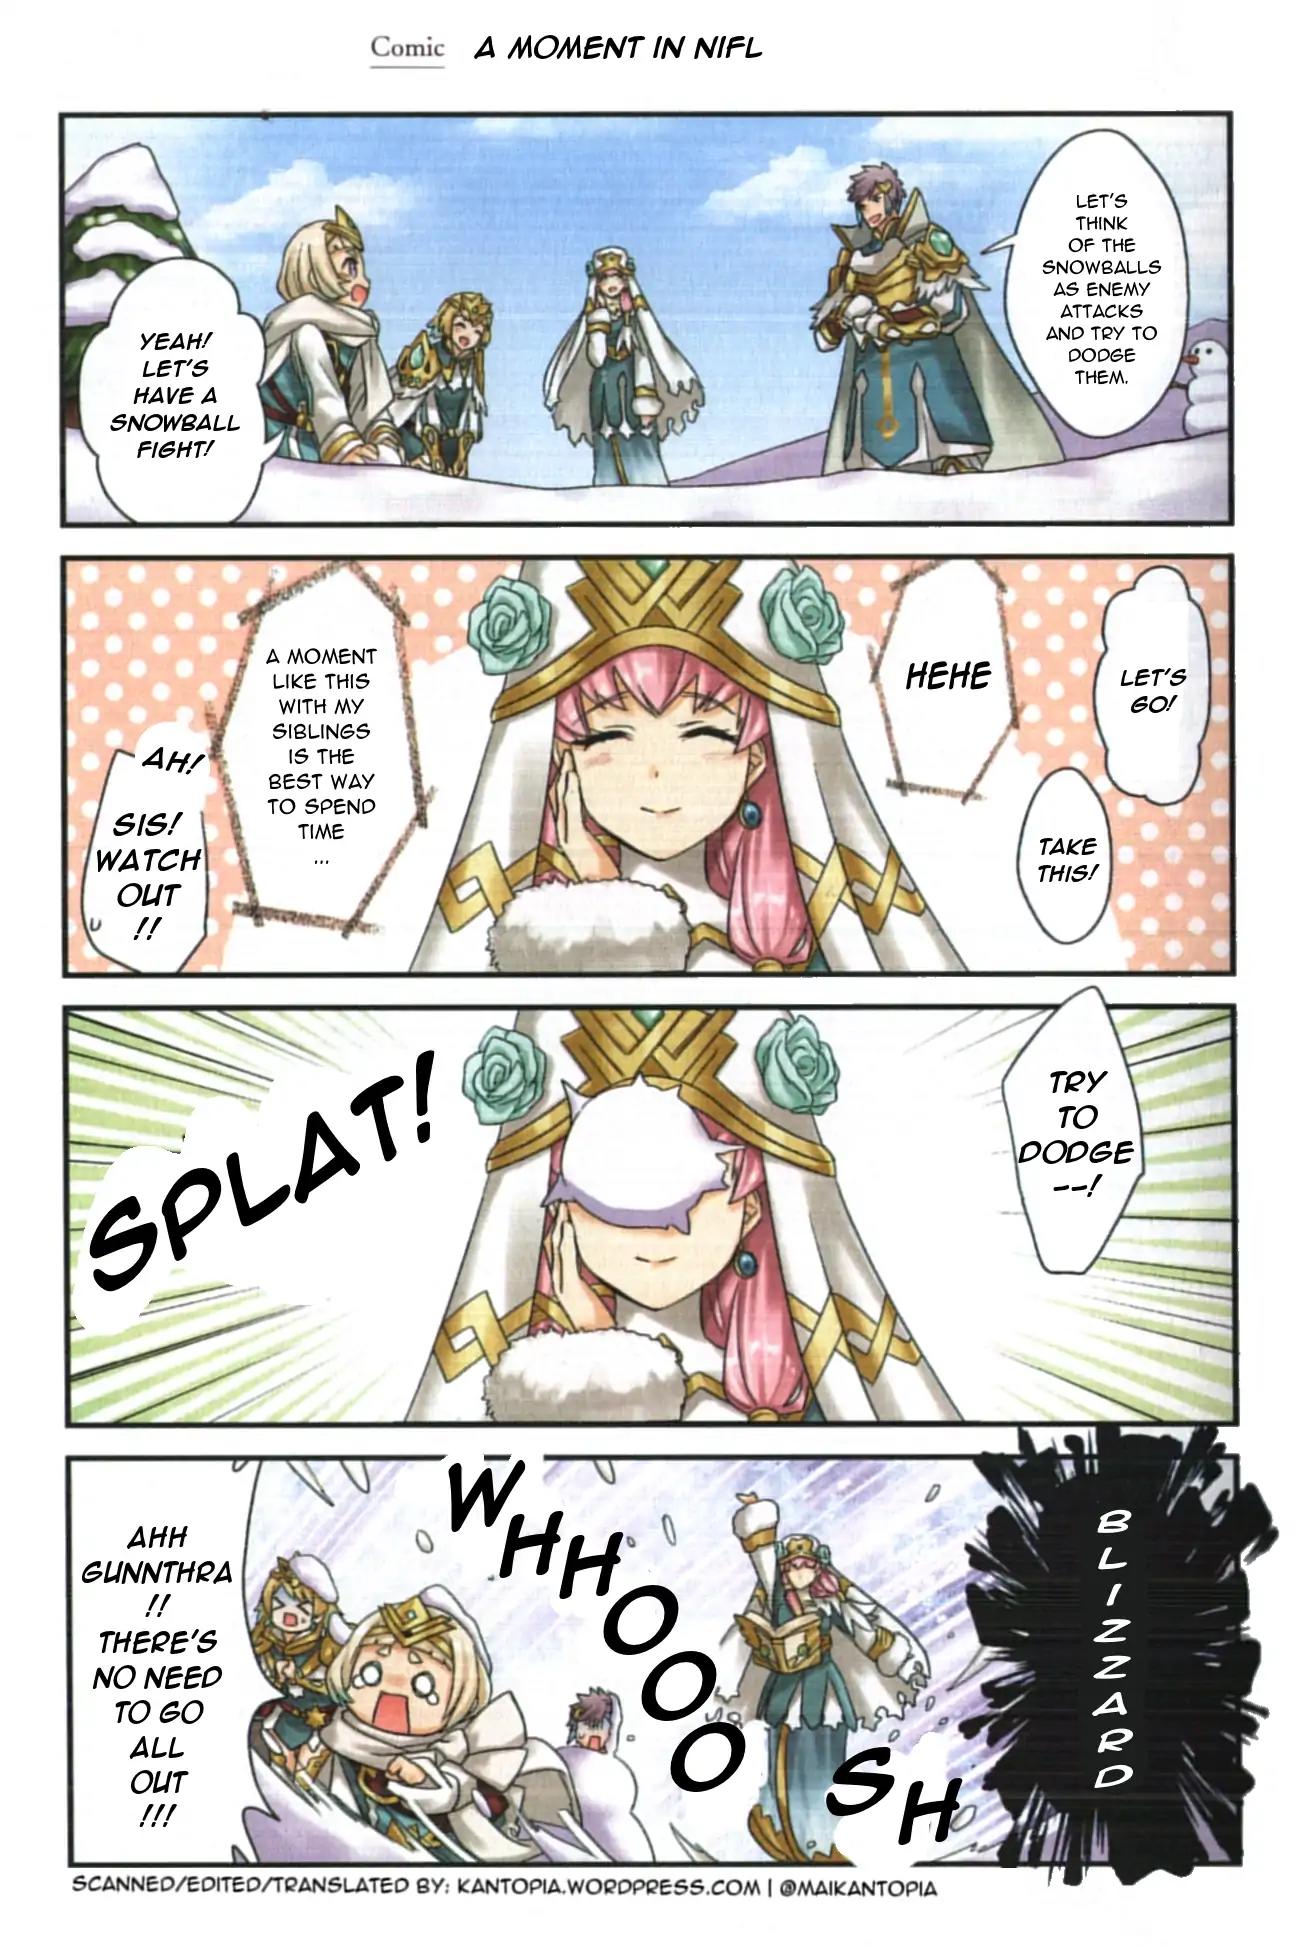 Fire Emblem Heroes Daily Lives of the Heroes Vol.1 Chapter 0.09: Character comic: